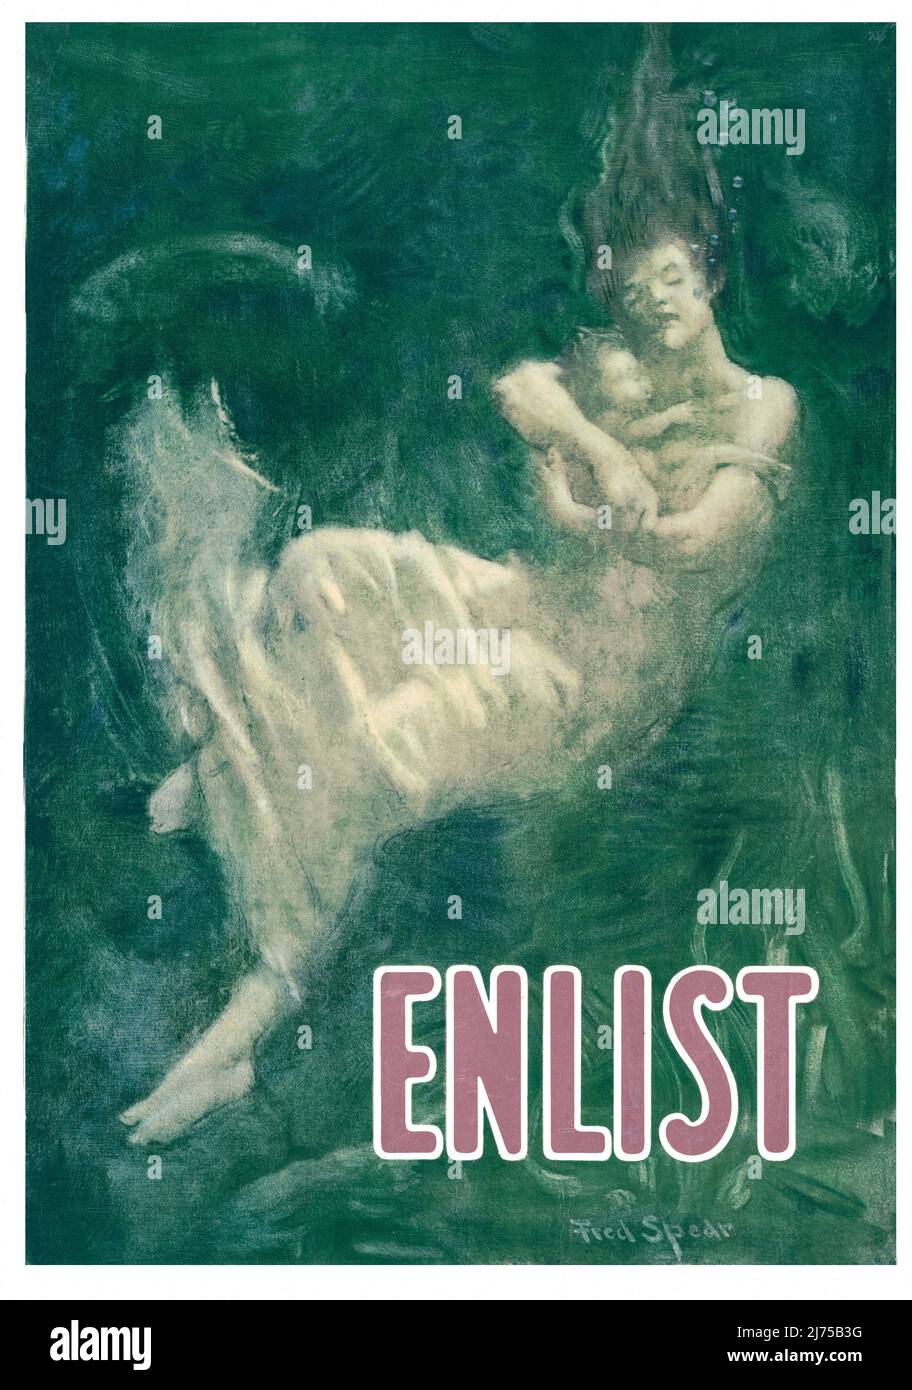 An early 20th century American poster from World War One, 1914-1918, showing a woman passenger from the Lusitania, submerged in water cradling an infant in her arms. The artist is Fred Spear. Stock Photo